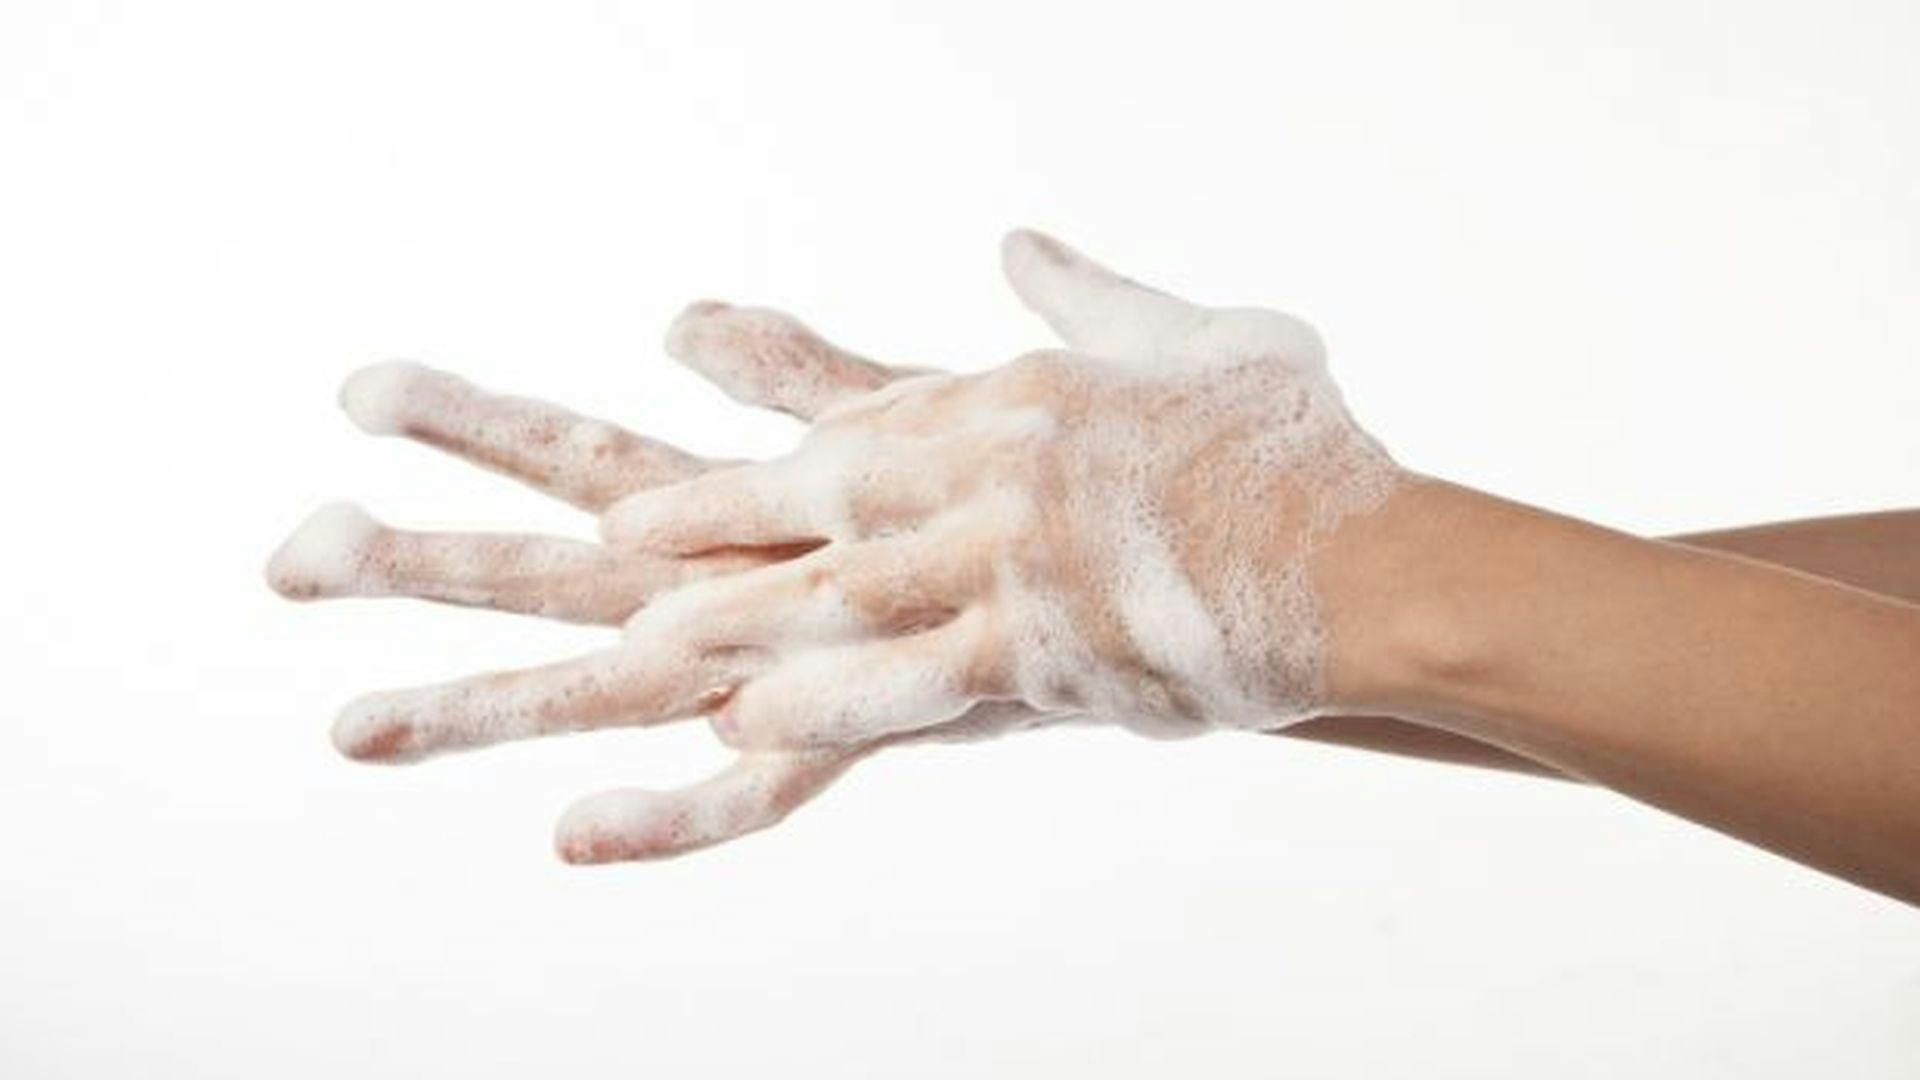 Handwashing Not Just for Germs, Study Suggests